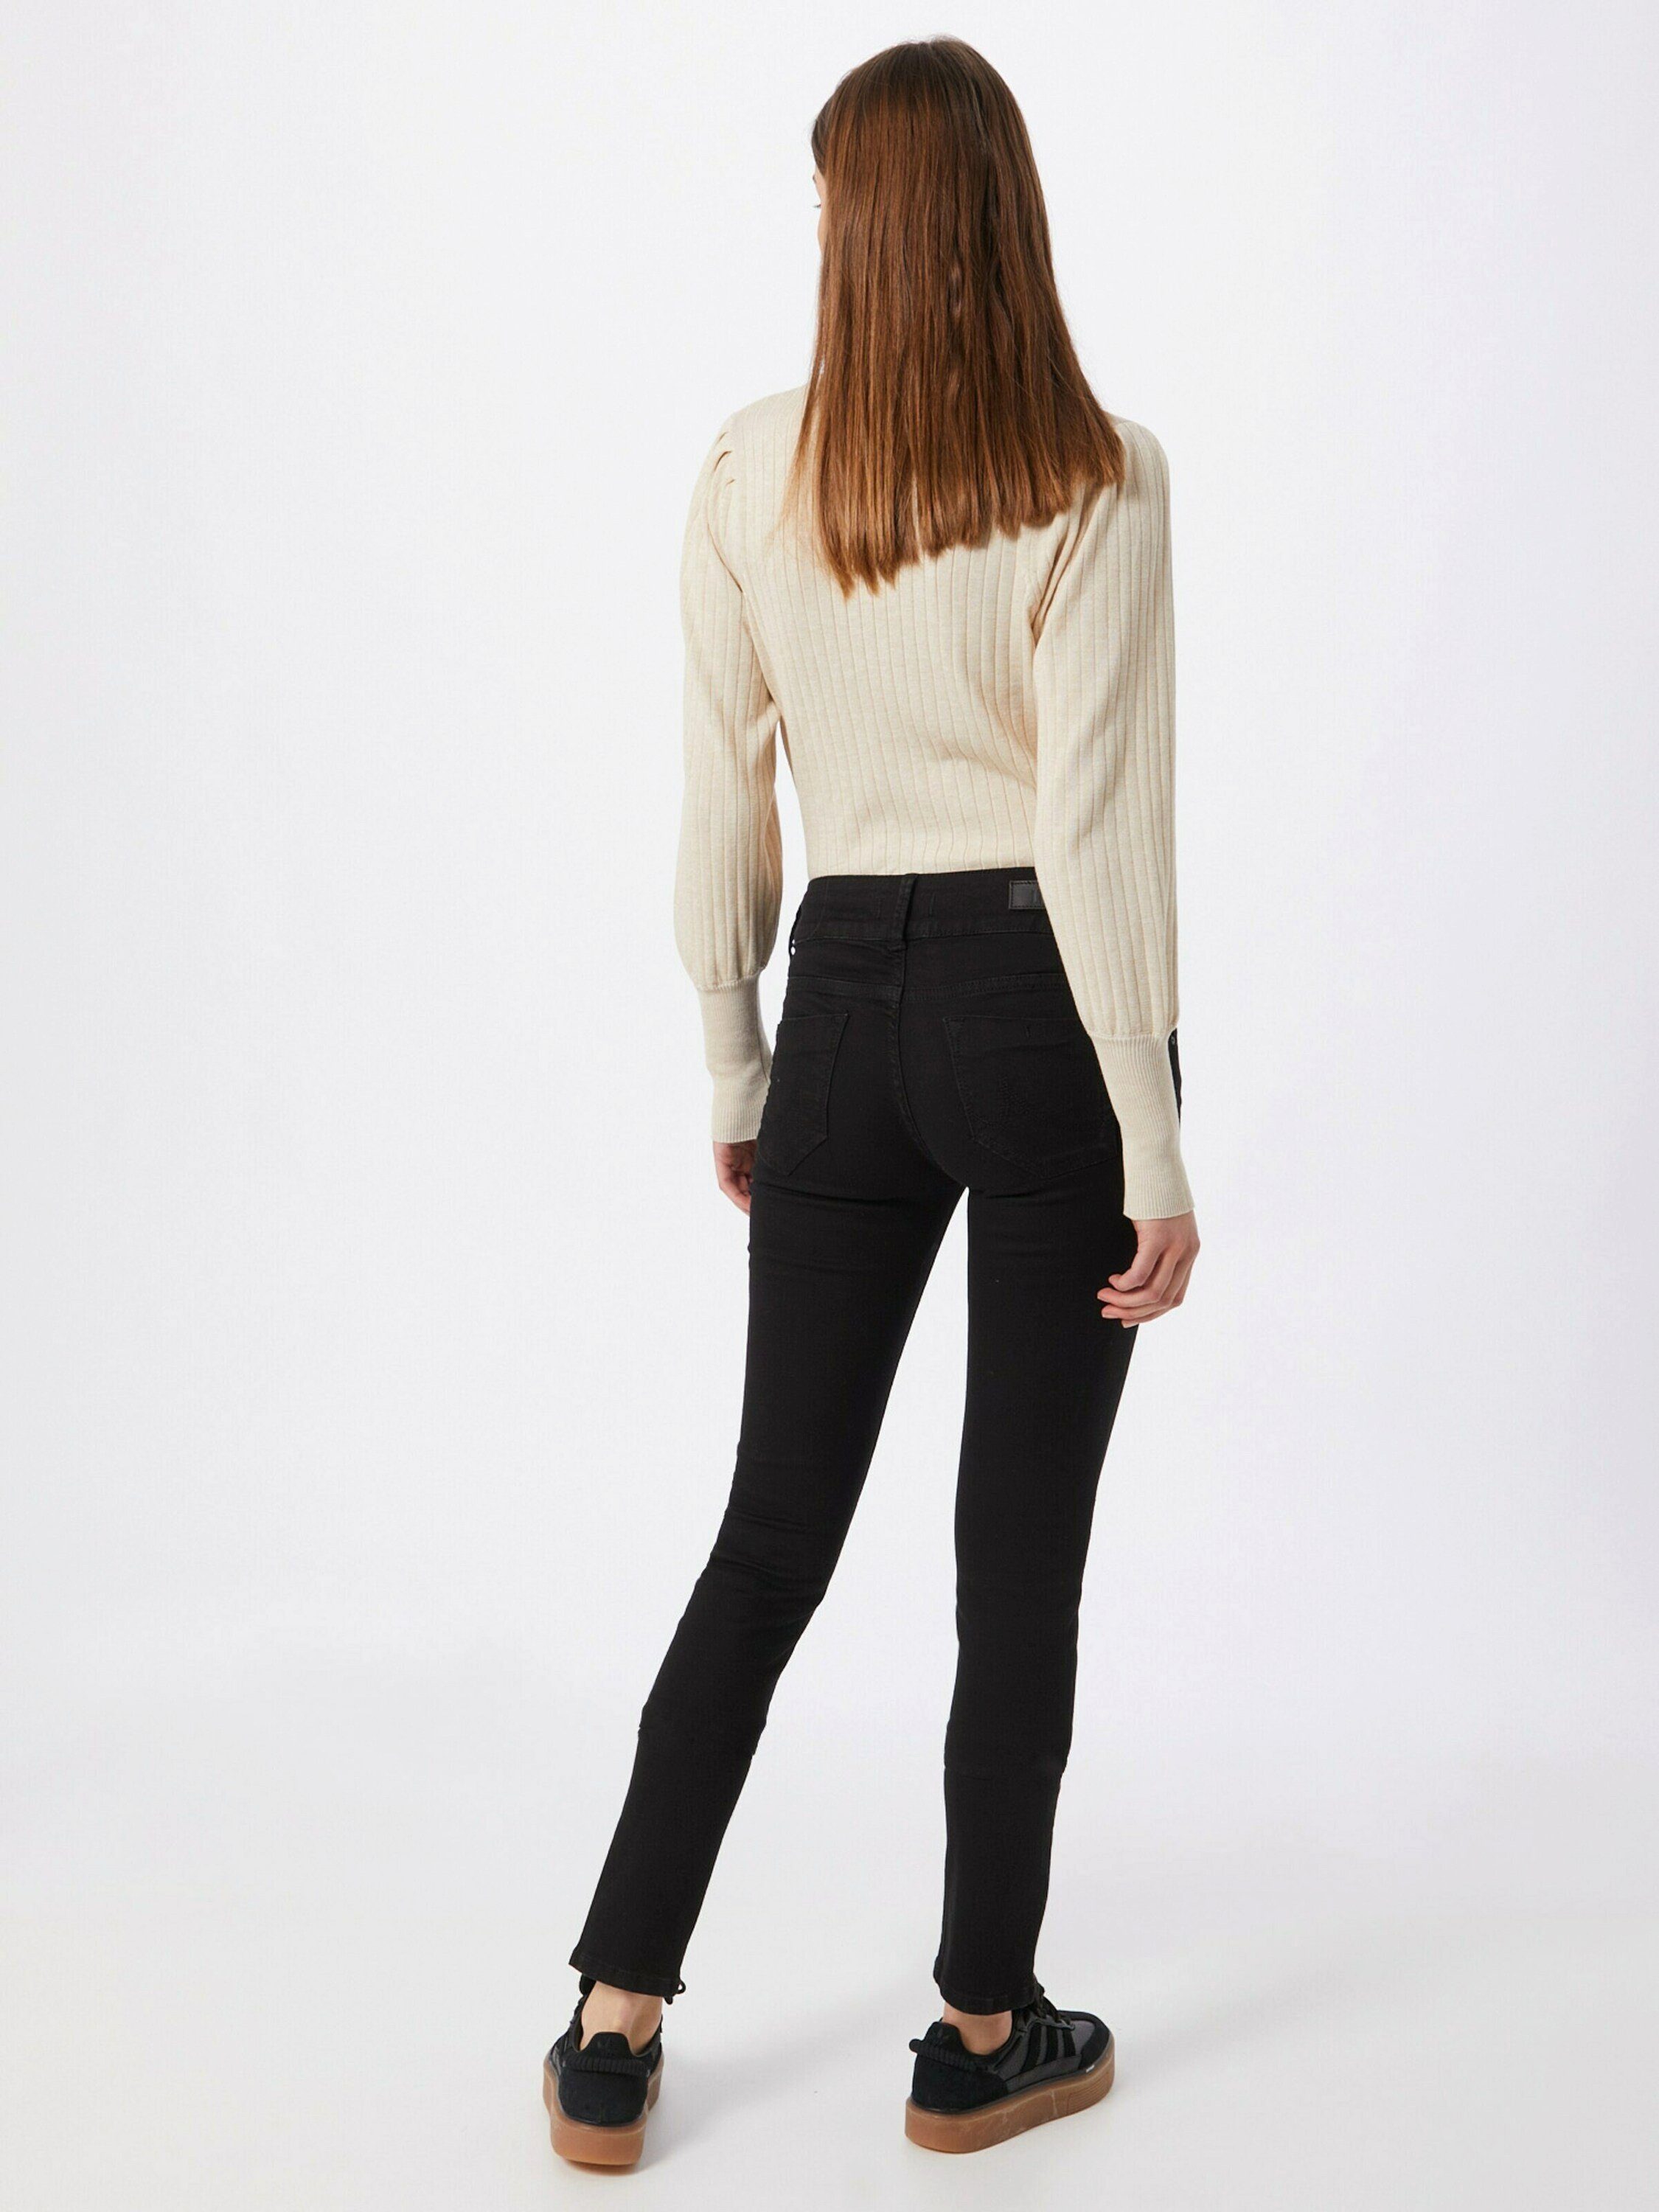 LTB (1-tlg) Details, Weiteres Molly Cut-Outs Plain/ohne Detail, Slim-fit-Jeans